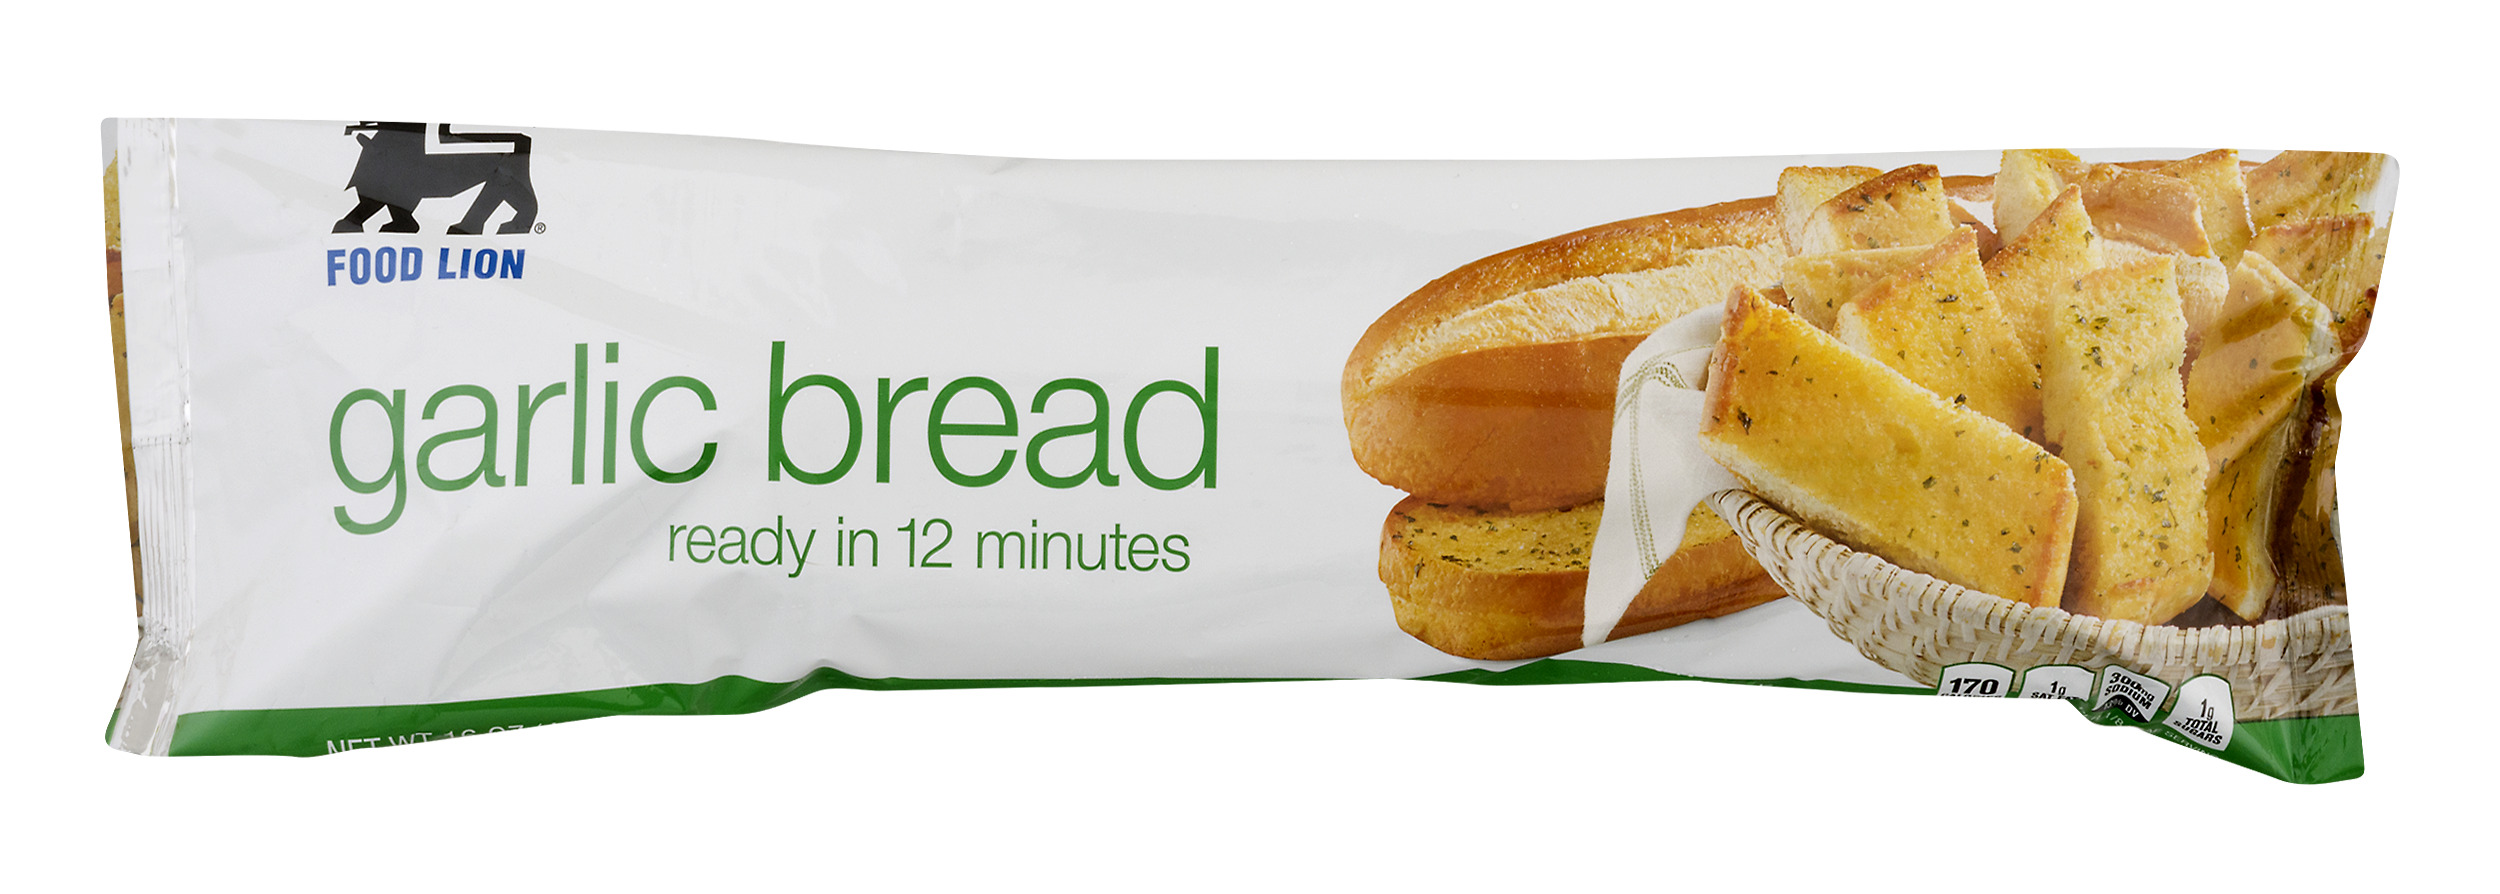 food lion wic approved bread